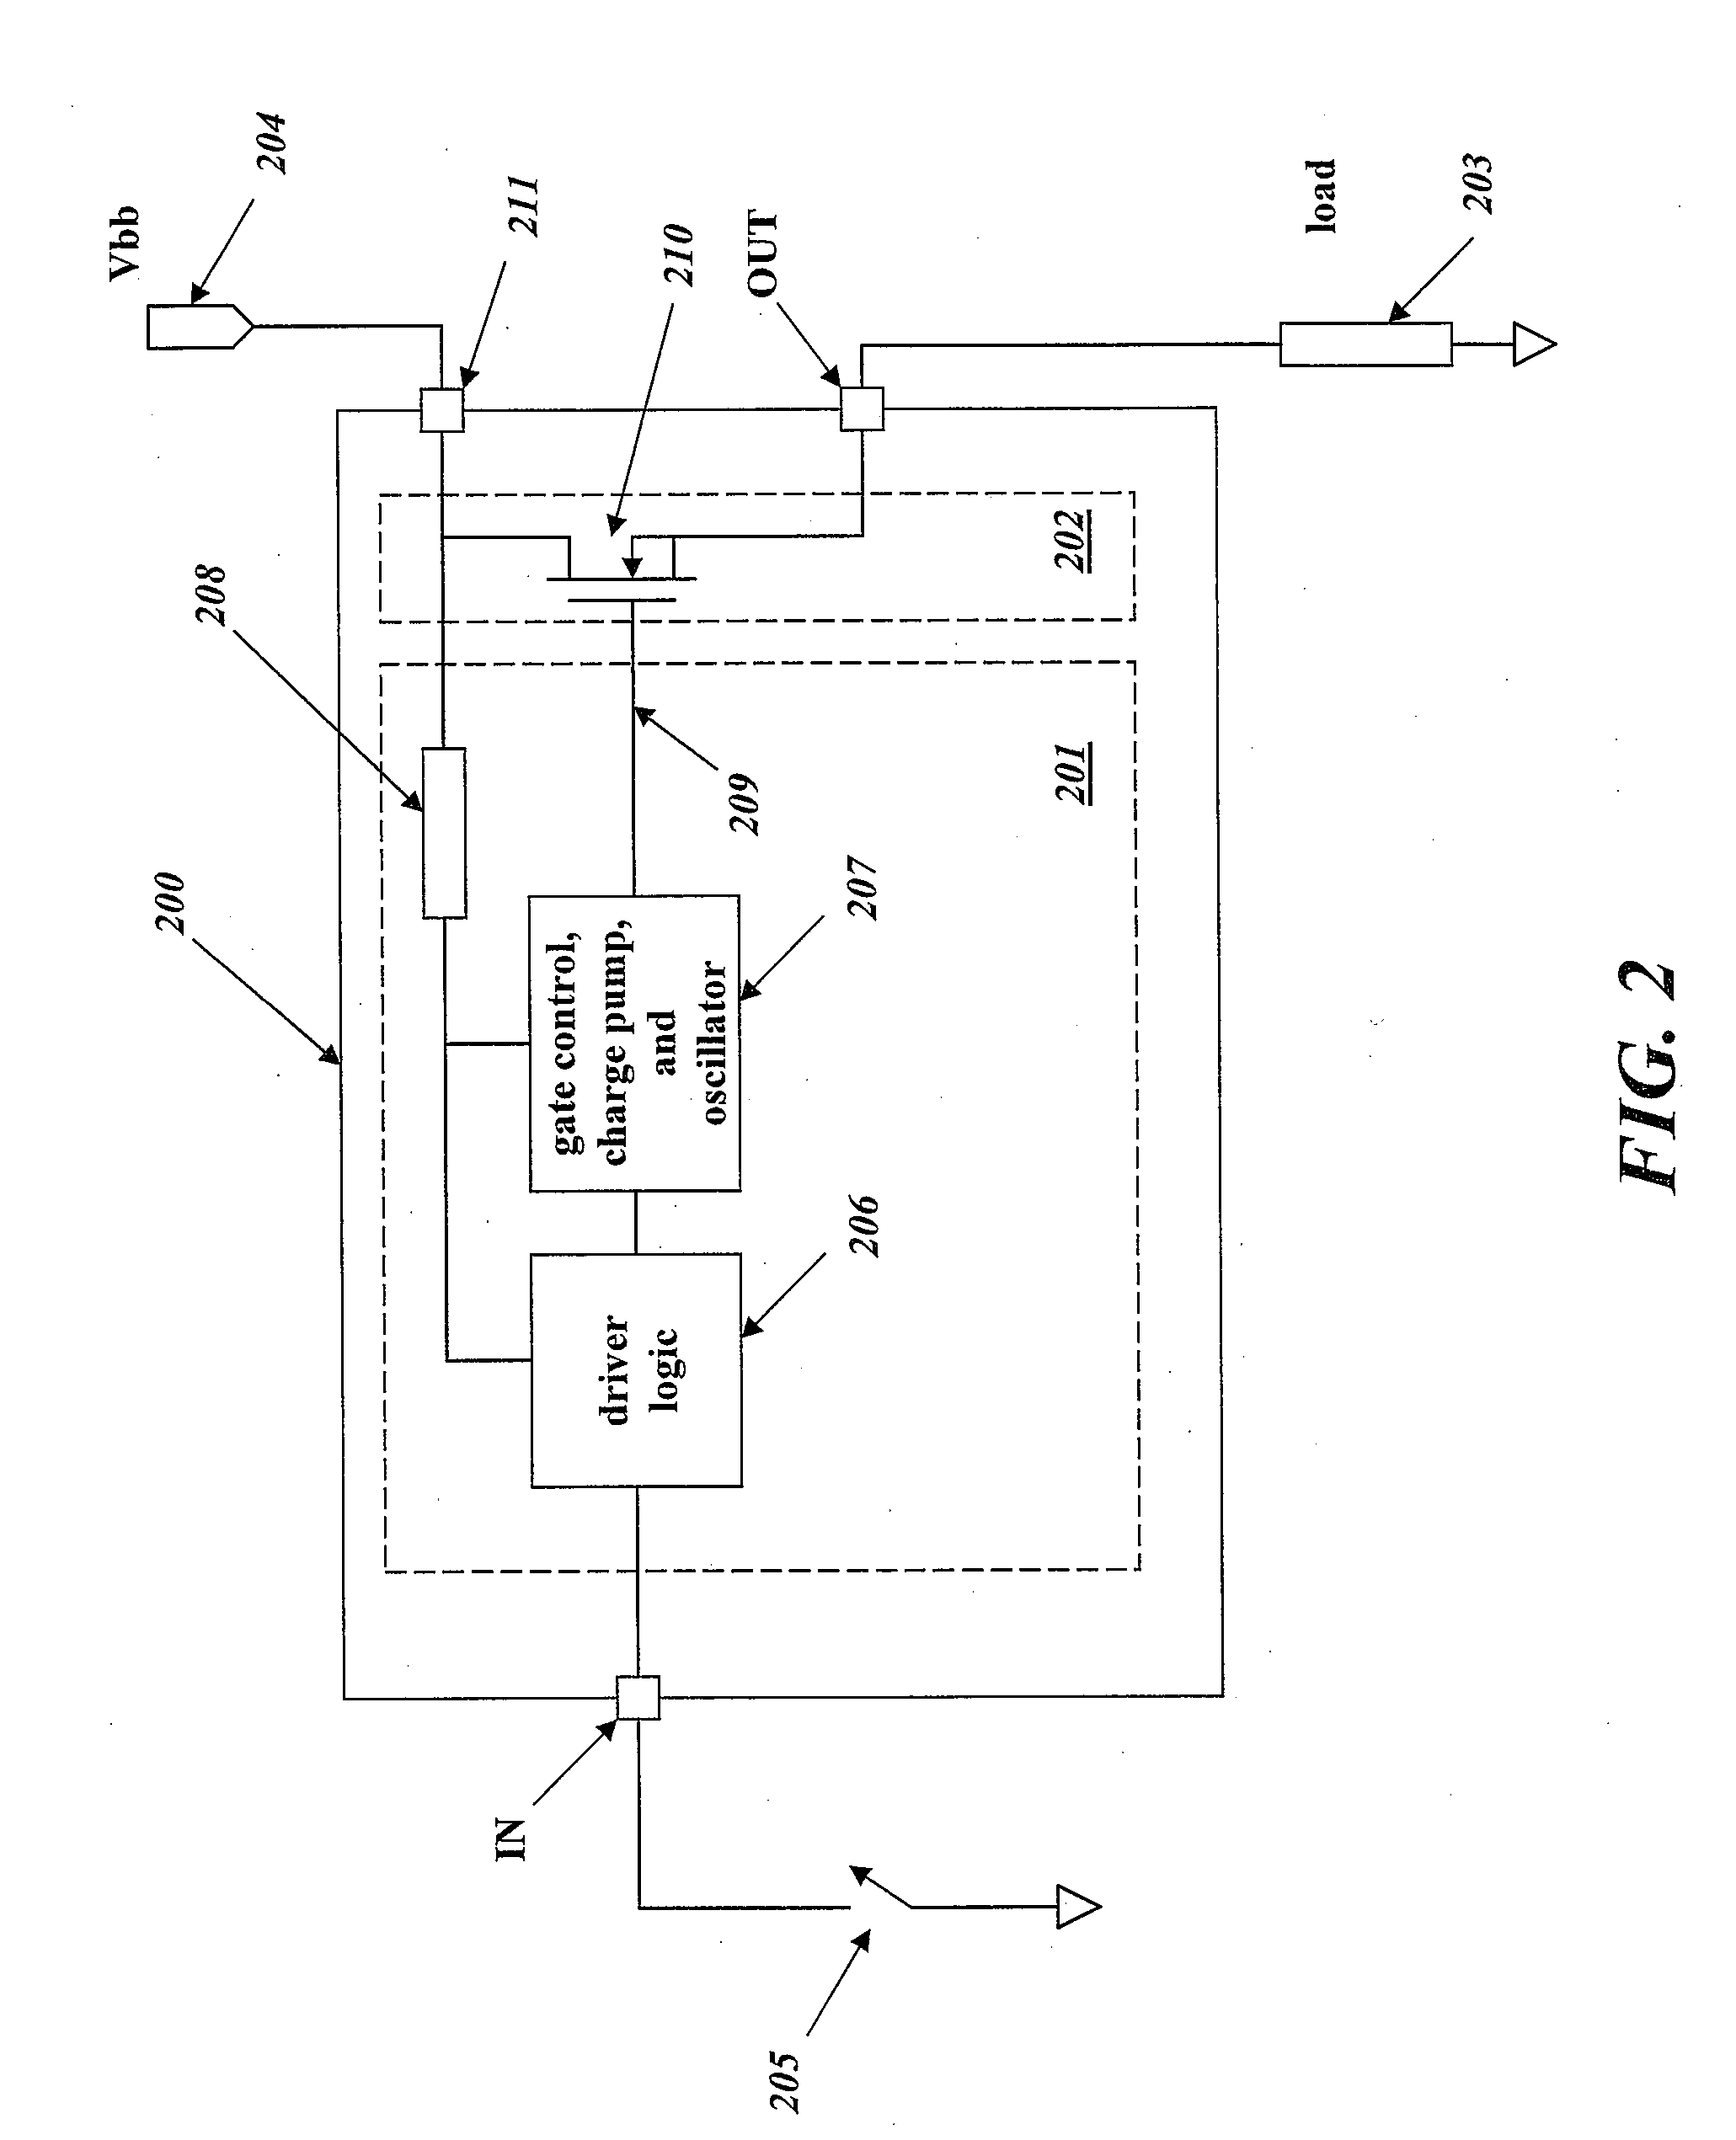 Clock-Pulsed Safety Switch